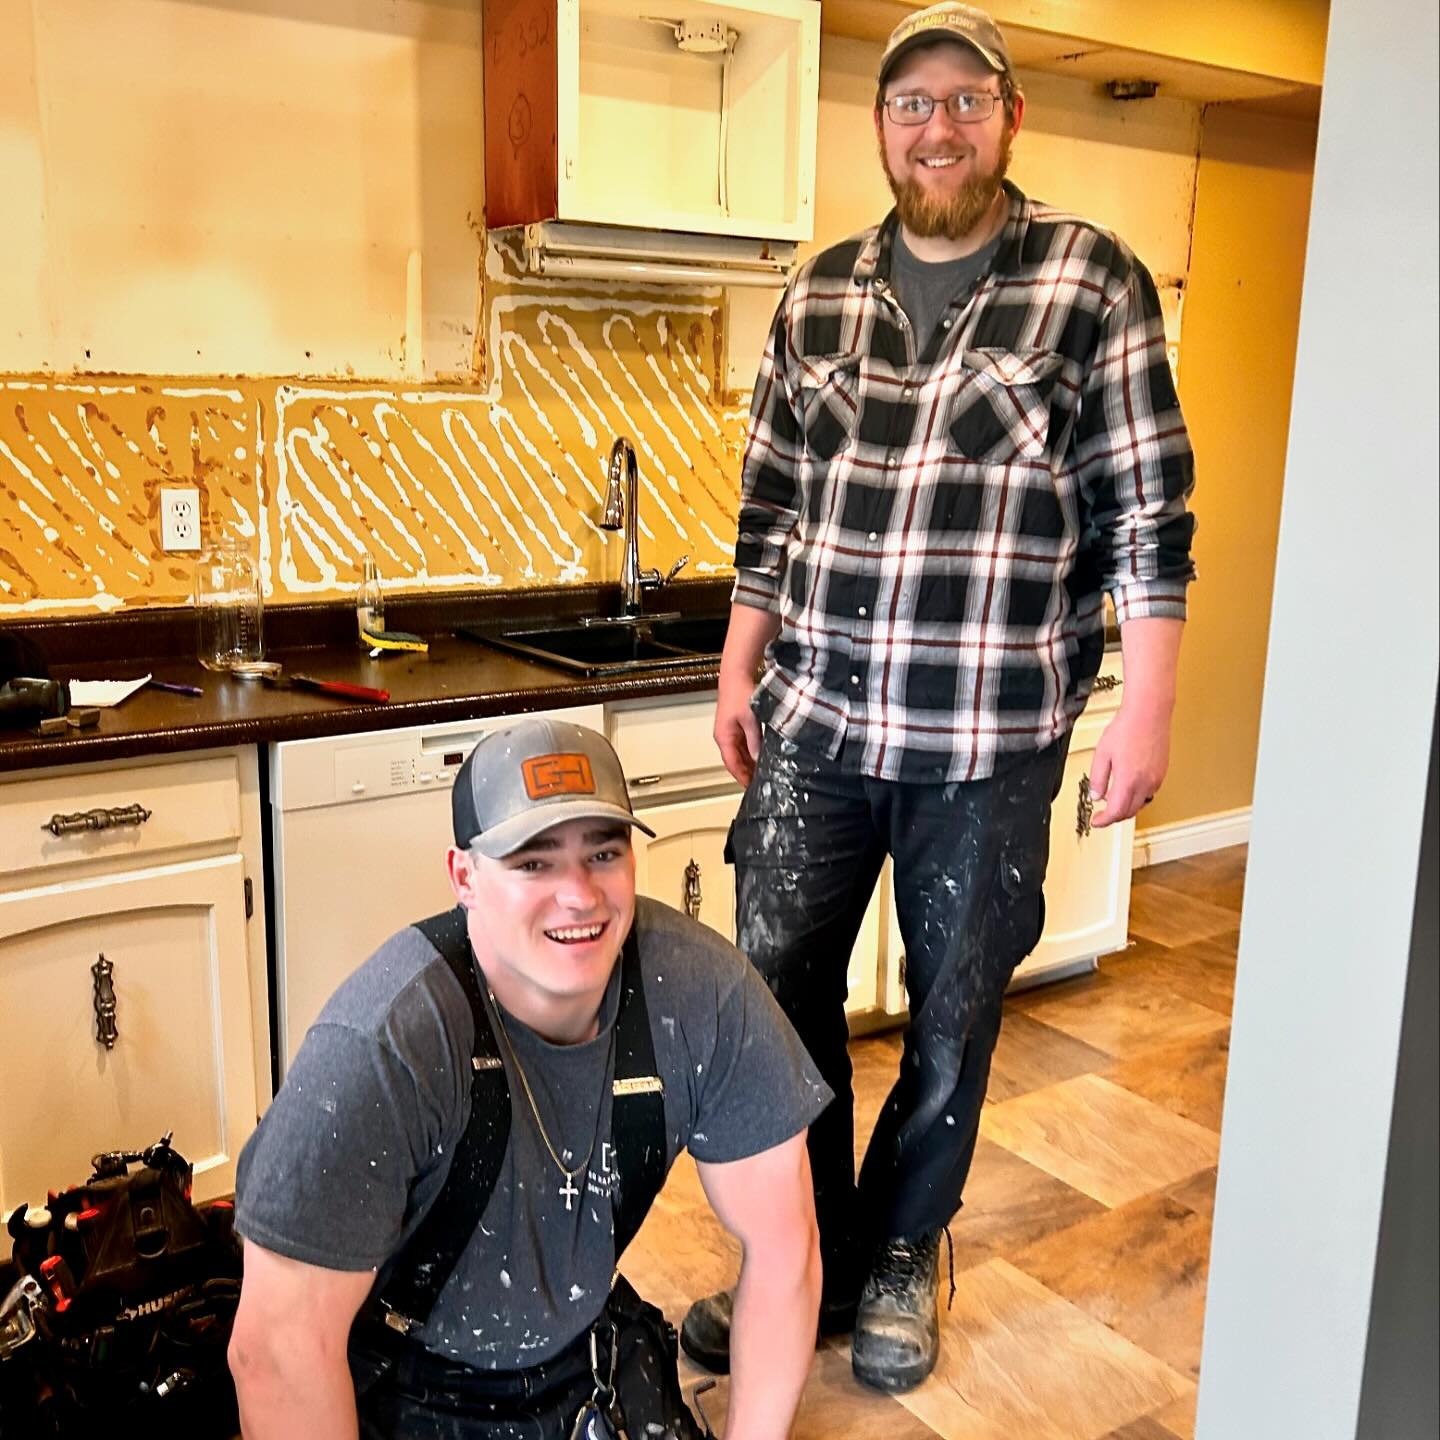 Sam and Shane are hard at work on a new kitchen installation in Hespeler. 
We can&rsquo;t wait for the reveal. 👏

#hespelercambridge #hespelervillage #hespeler #hespelerbusiness #hespelerrocks #gohardcorporation #designbuild #kitchenrenovation #kitc